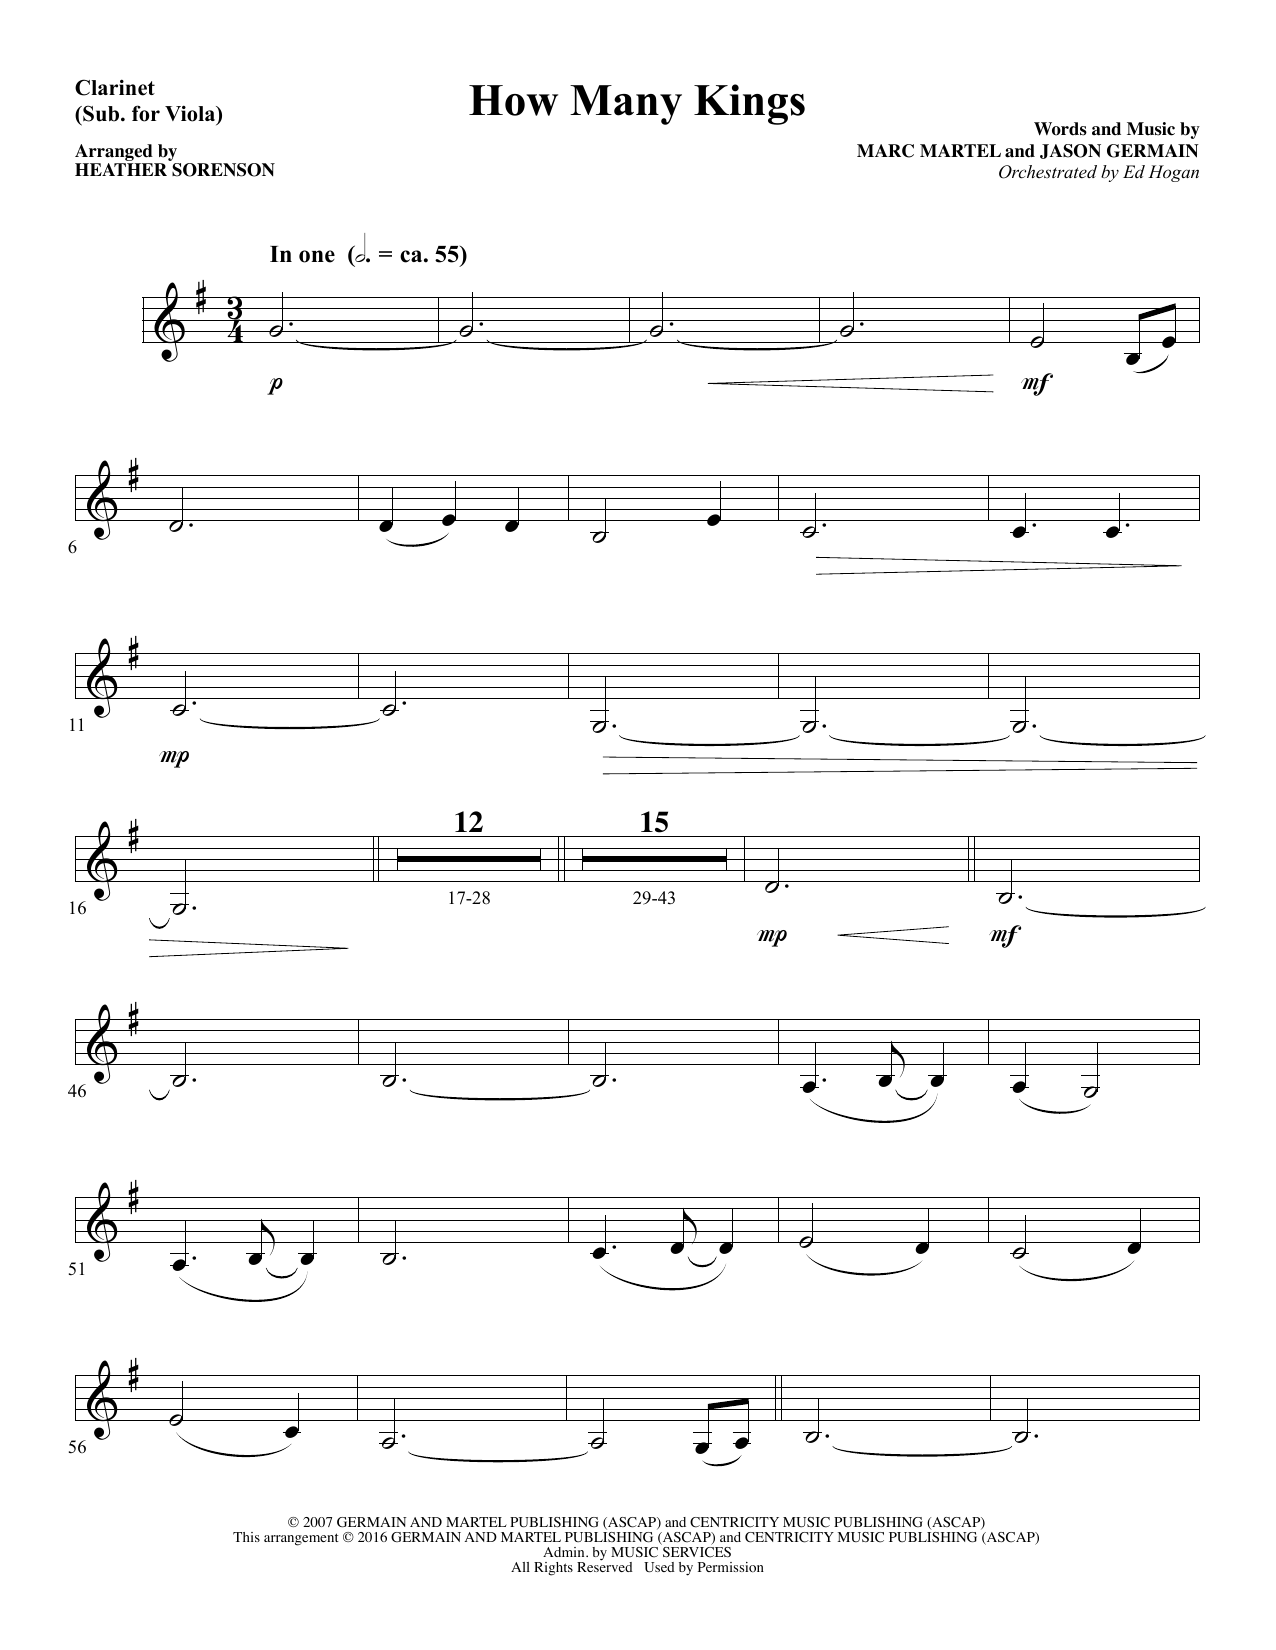 Download Heather Sorenson How Many Kings - Clarinet (sub Viola) sheet music and printable PDF score & Christian music notes